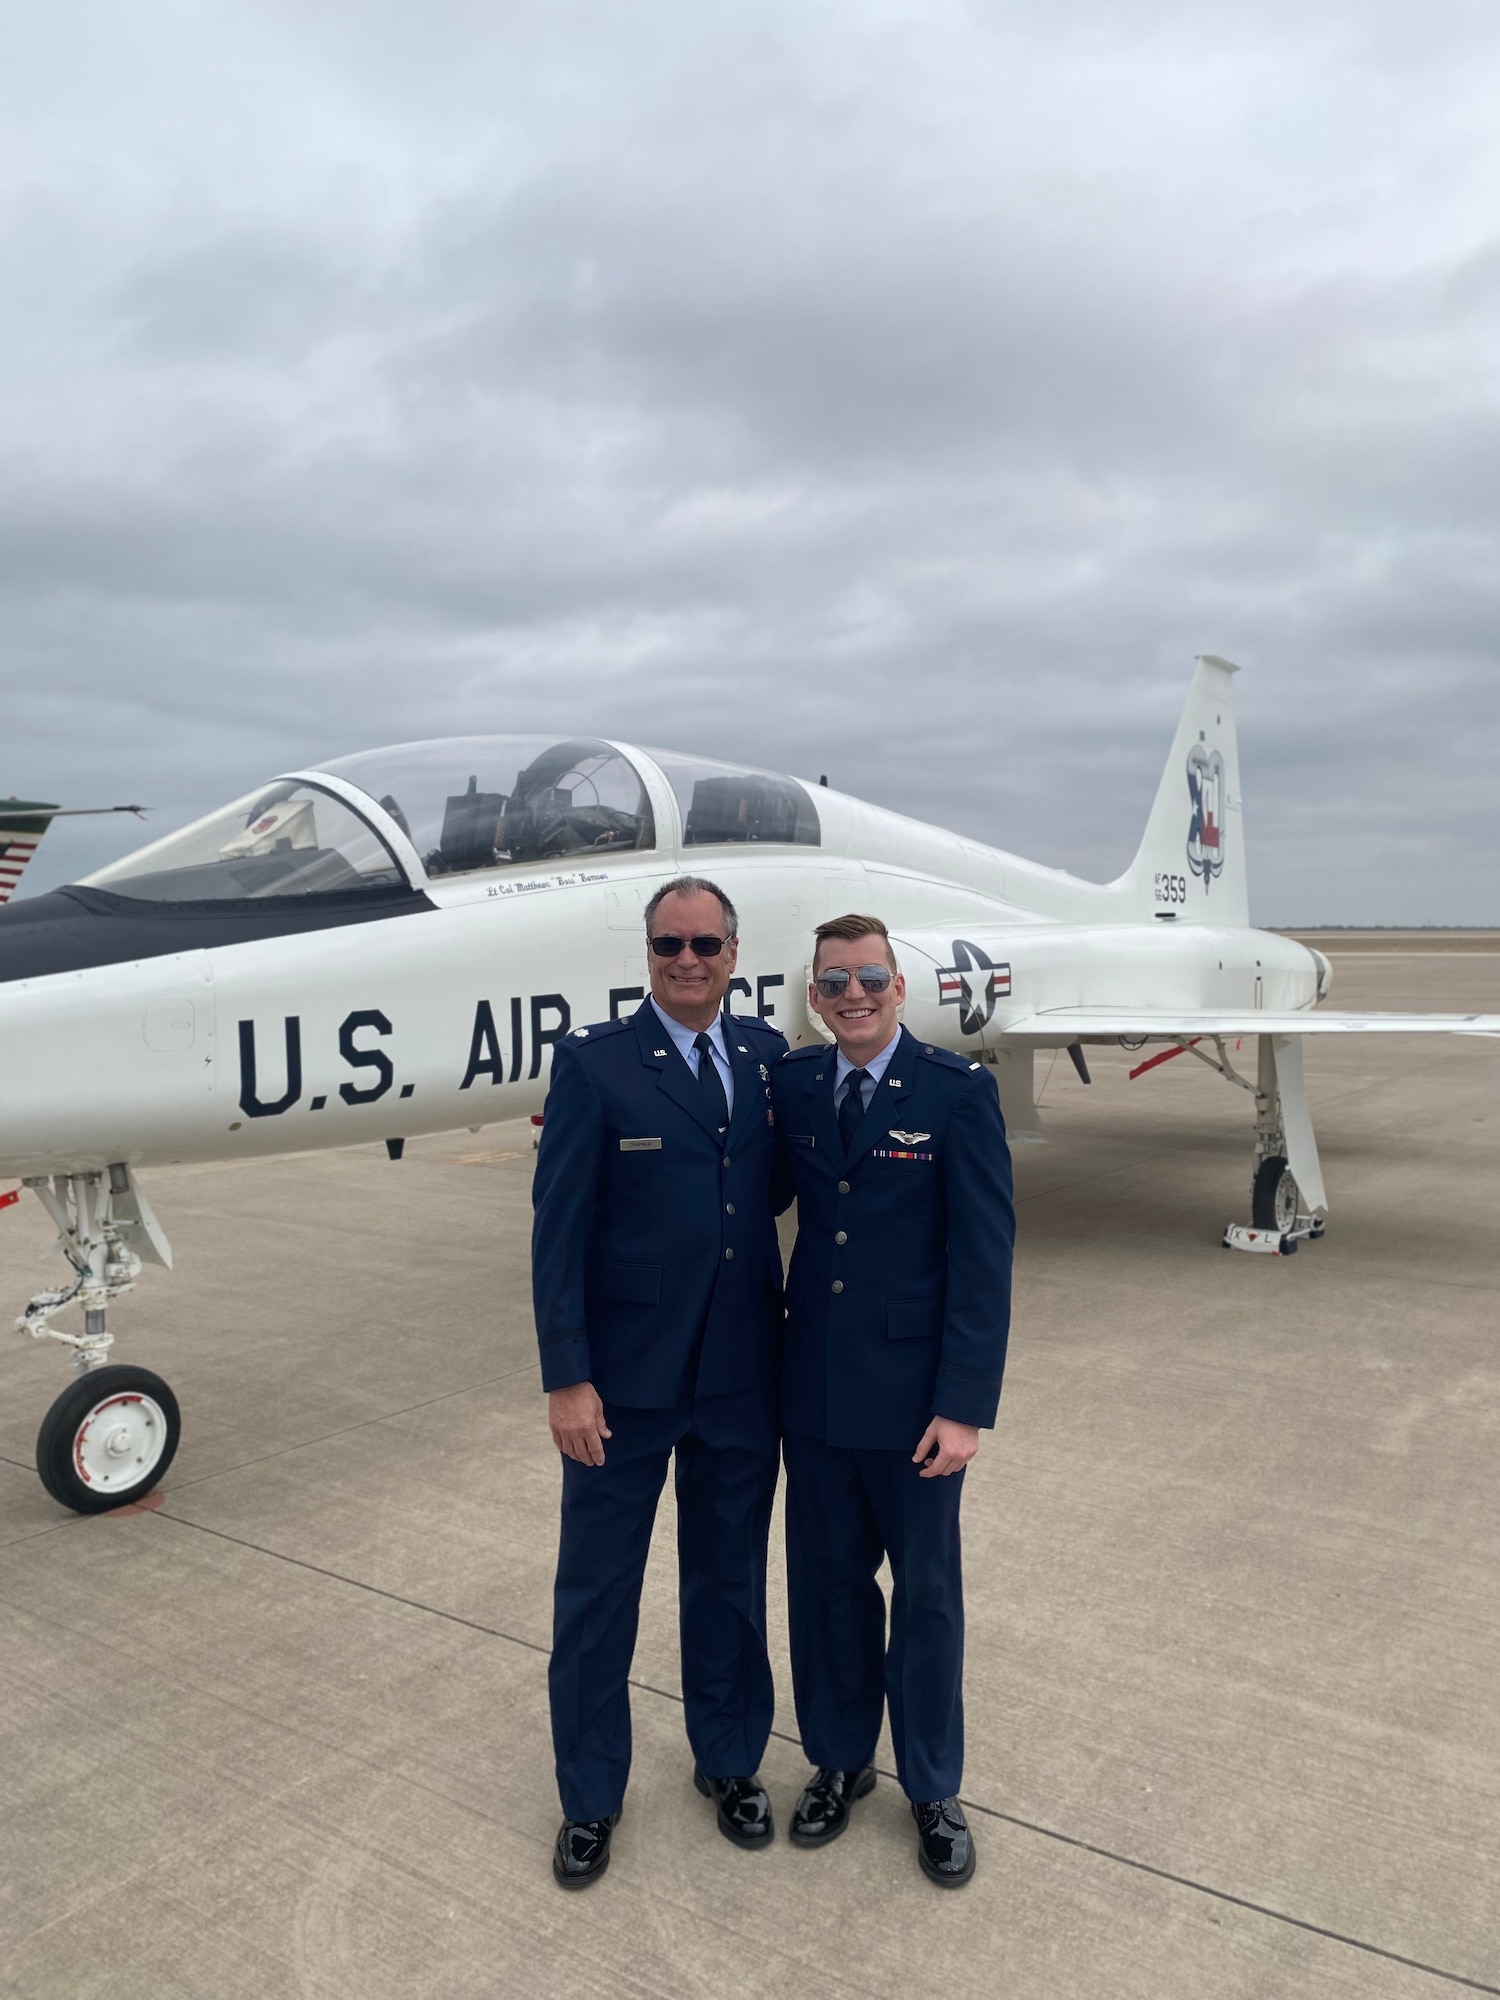 U.S. Air Force 1st Lt. Chad Chapman (right), 47th Student Squadron T-38 Talon student pilot, stands in front of a T-38 Talon with his uncle, retired Lt. Col. James Chapman (left) at Laughlin Air Force Base, Texas. (U.S. Air Force courtesy photo)